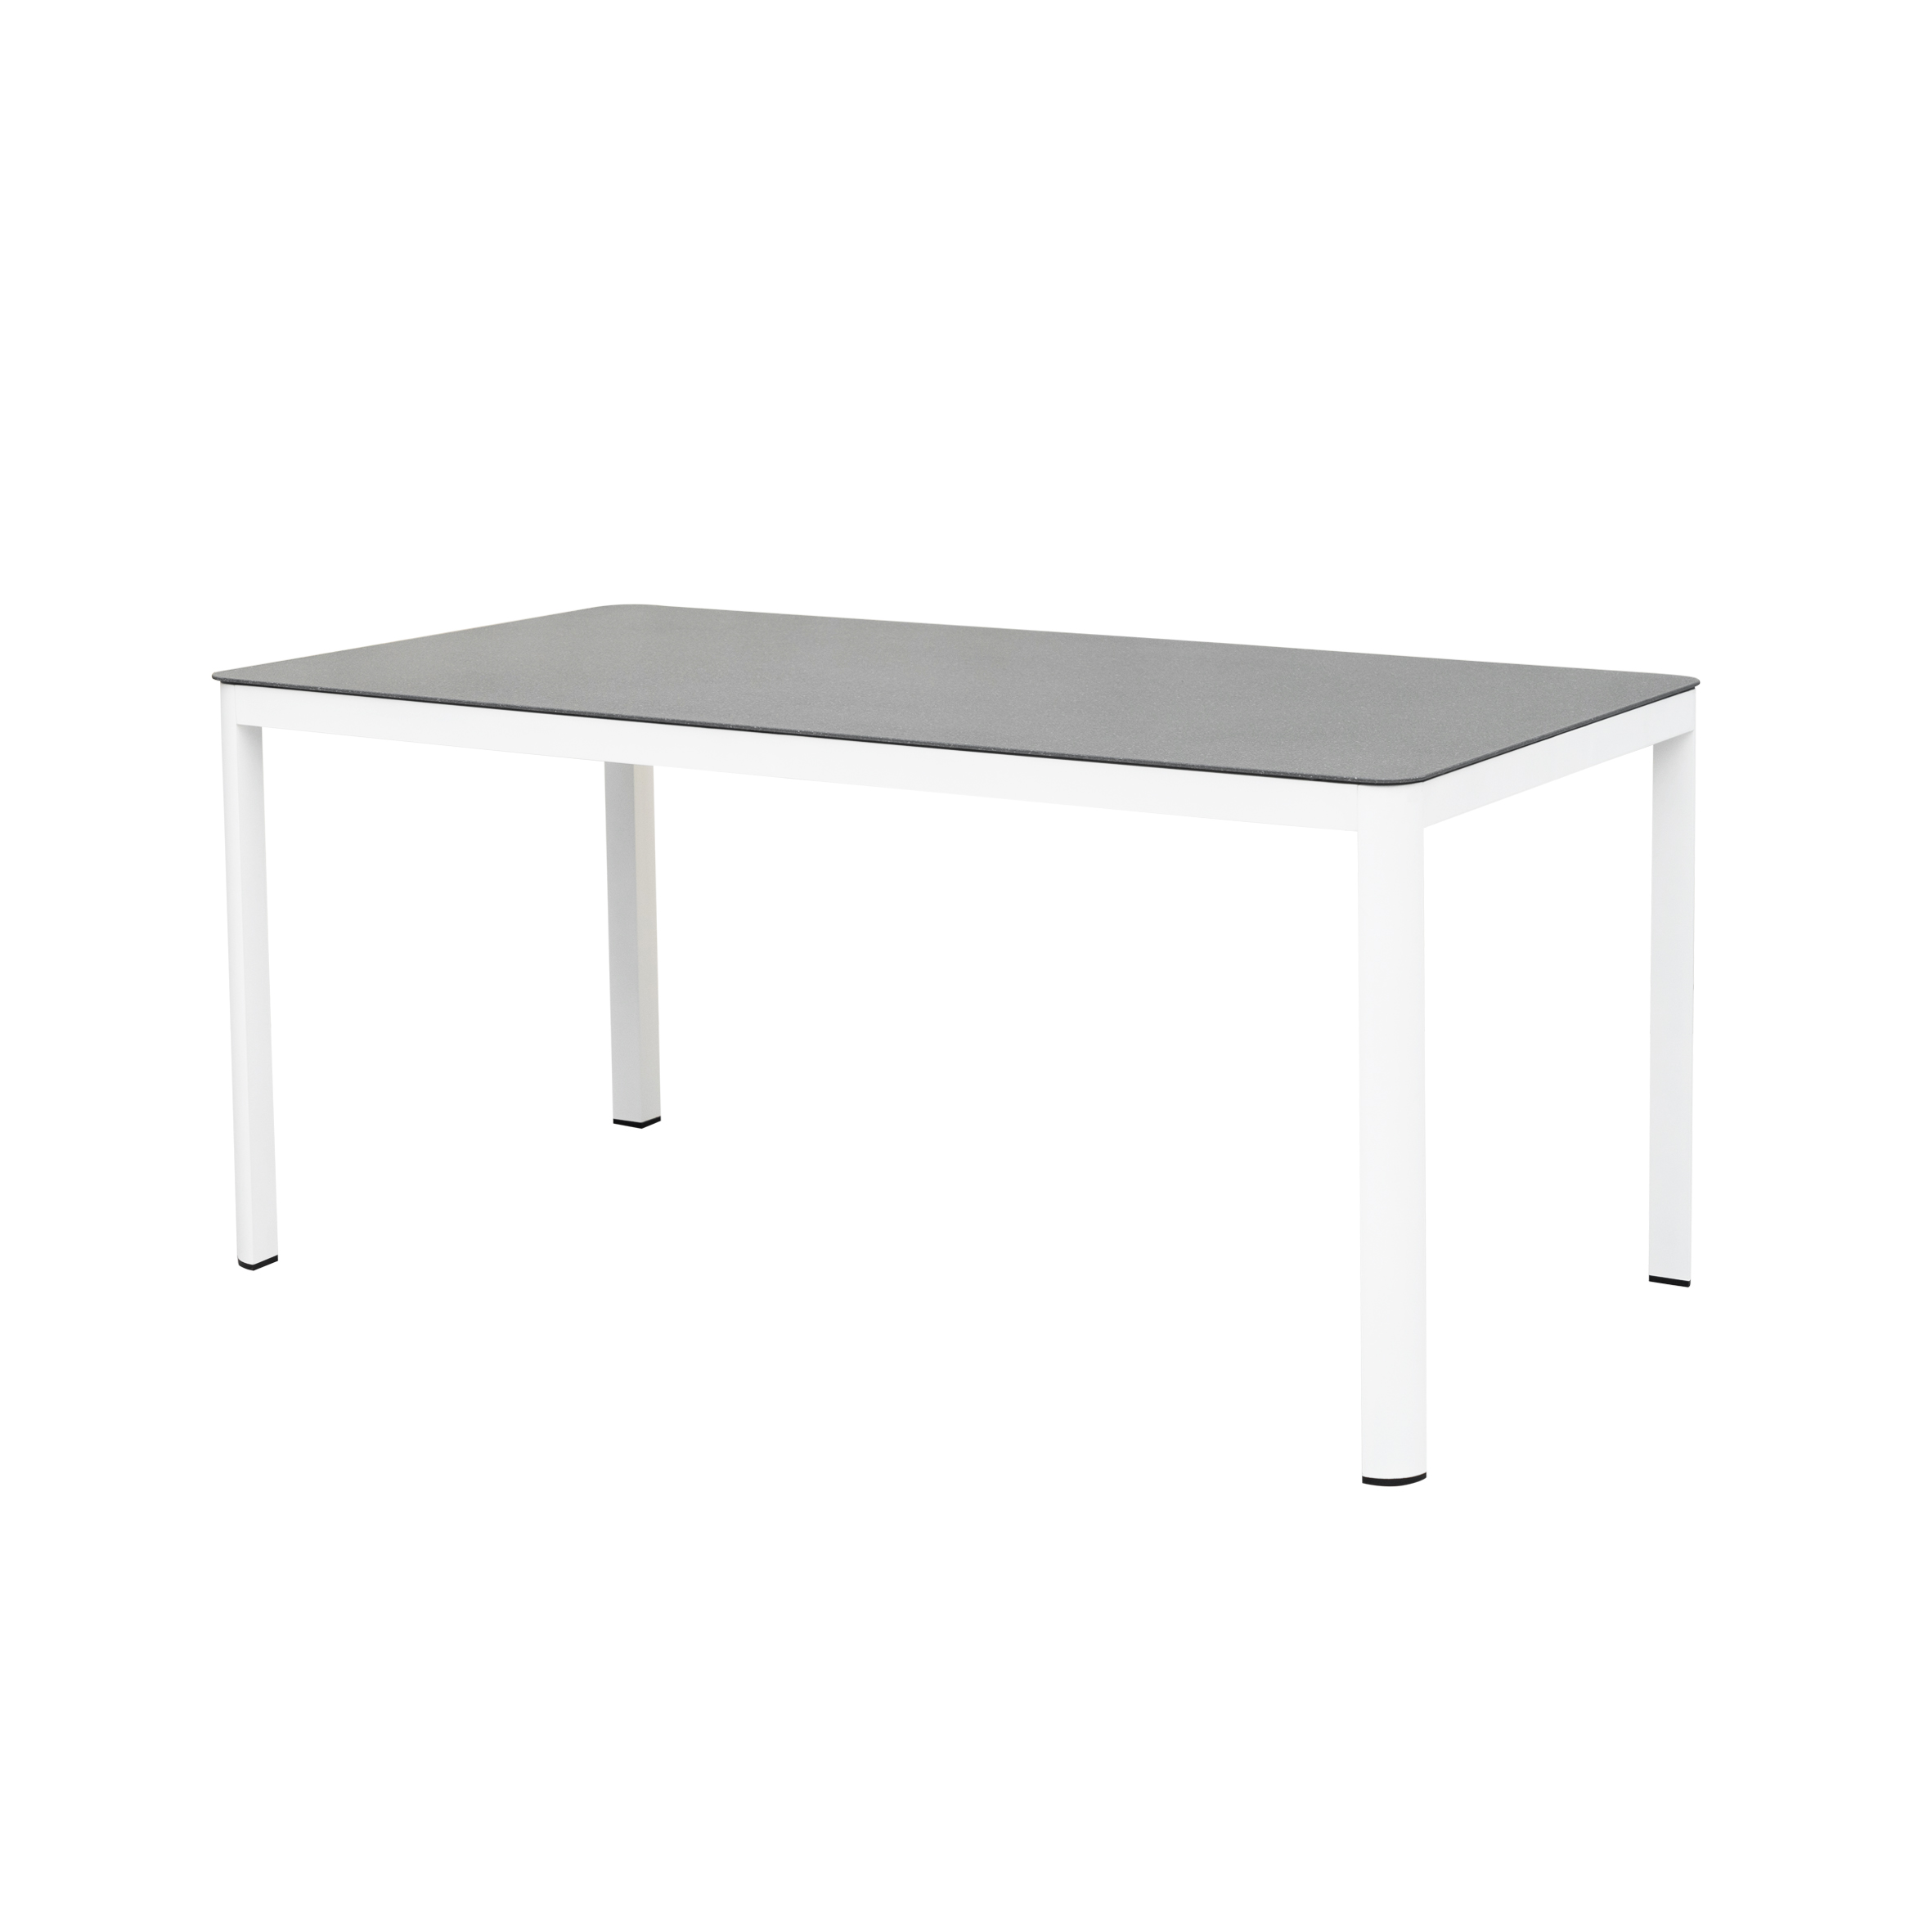 Belgium rectangle table(Stone glass) Featured Image